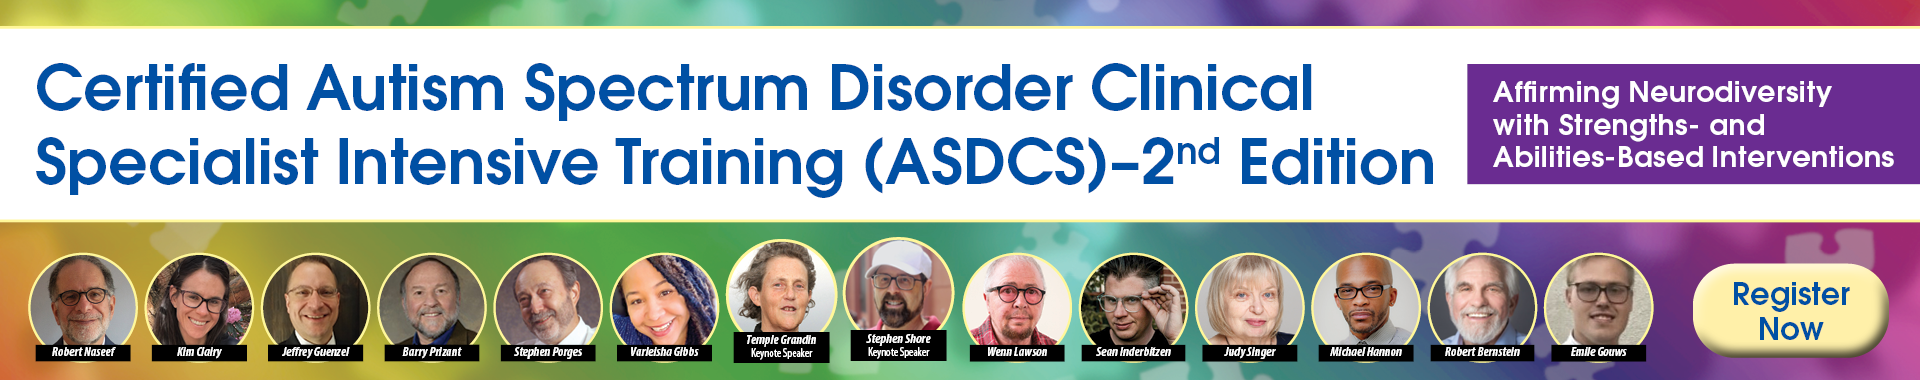 Certified Autism Spectrum Disorder Clinical Specialist Intensive Training (ASDCS) - 2nd Edition: Affirming Neurodiversity with Strengths- and Abilities-Based Interventions